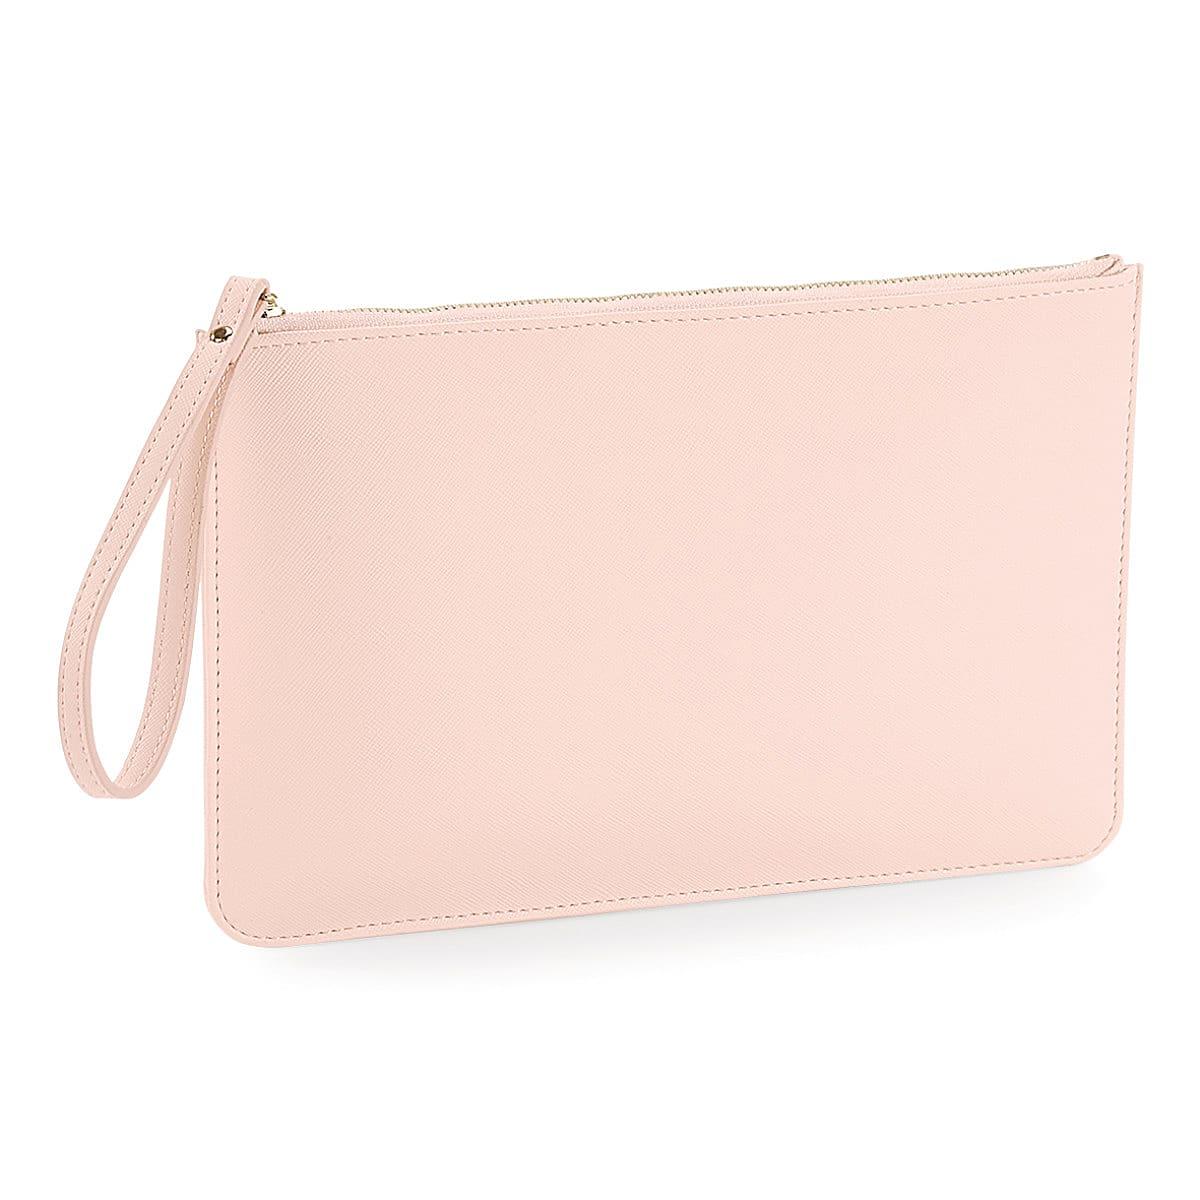 Bagbase Boutique Accessory Pouch in Soft Pink (Product Code: BG750)